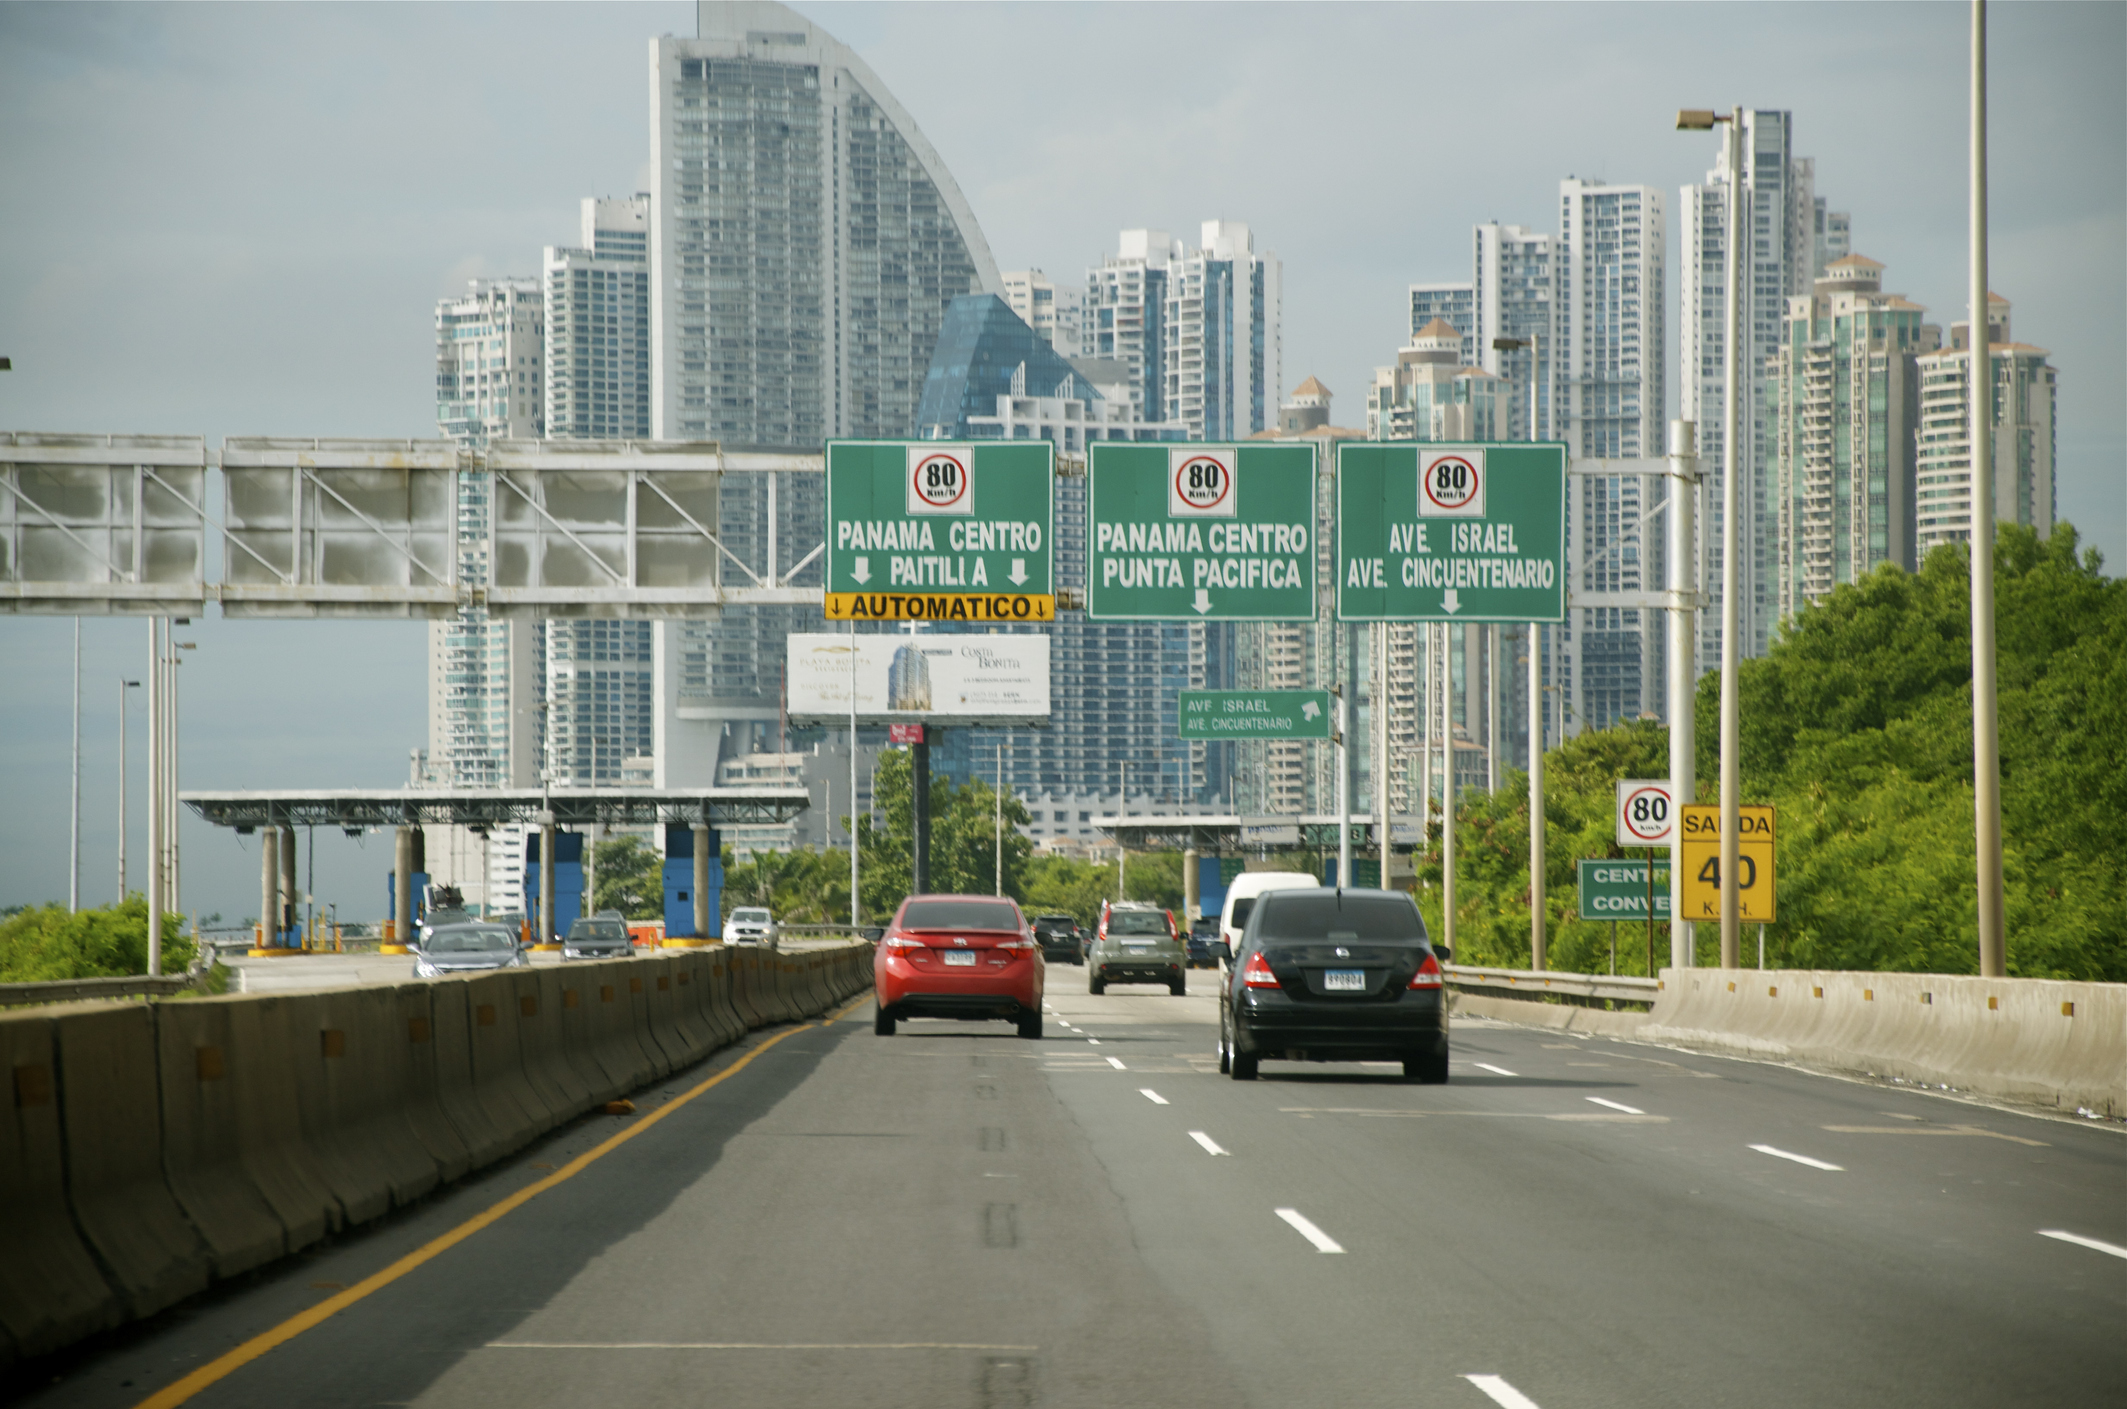 Do You Have Any Advice for Driving in Panama City?